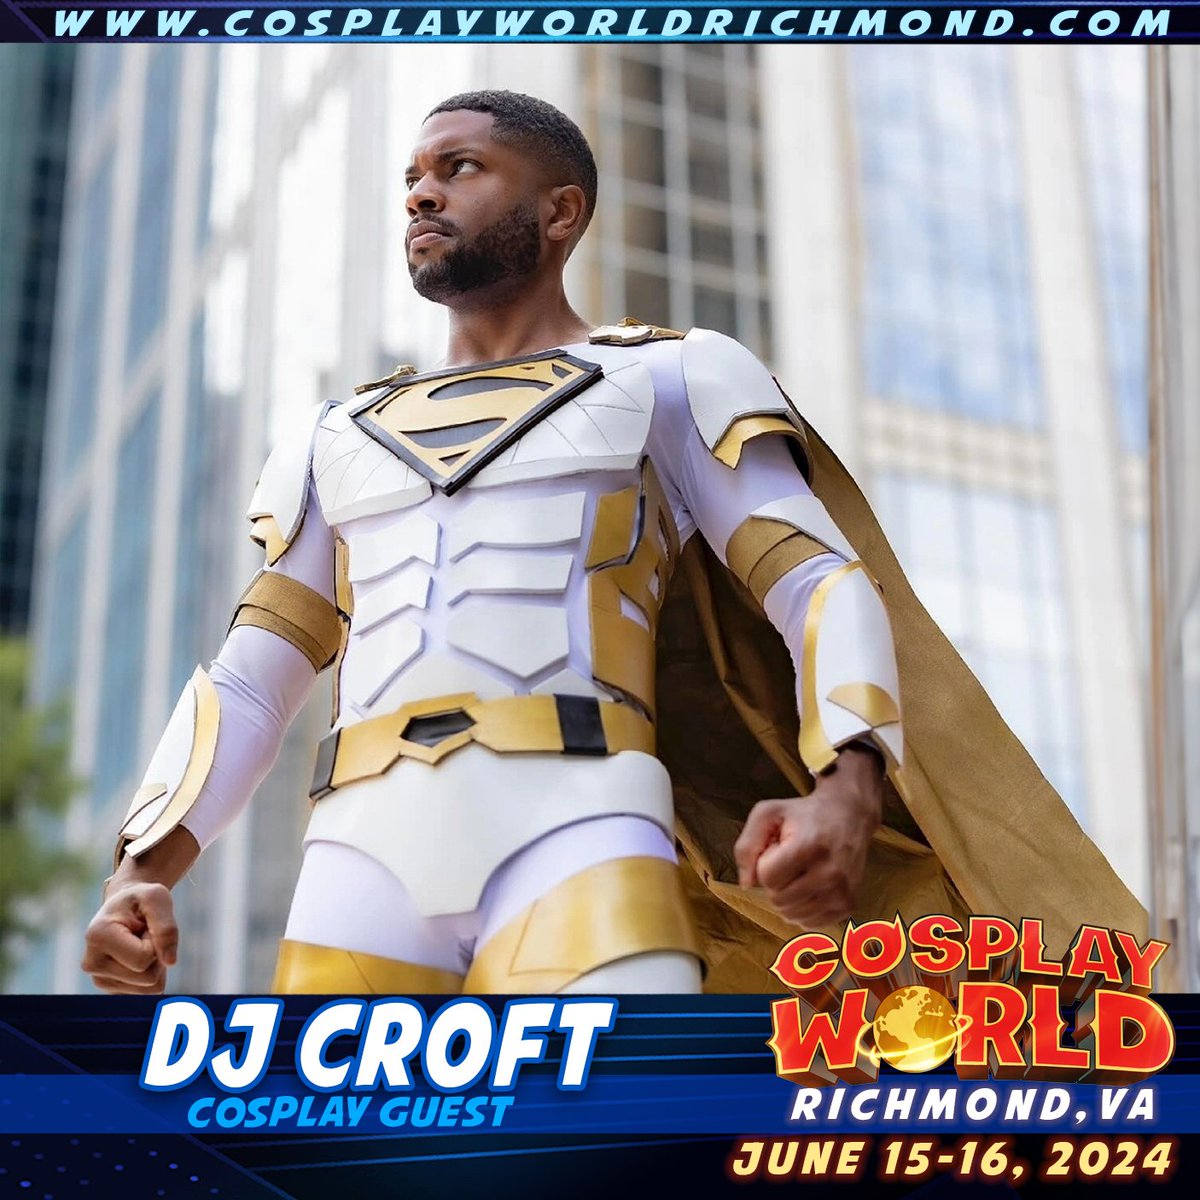 📢I will be joining Cosplay World Richmond✨️ this June 15-16, 2024!
Tickets are available now!
Get all of the details on our website
and at cosplayworldrichmond.com
.
.
#cosplay #cosplayworld #cosplayworld2024 #specialguest #cosplayguest #Virginia